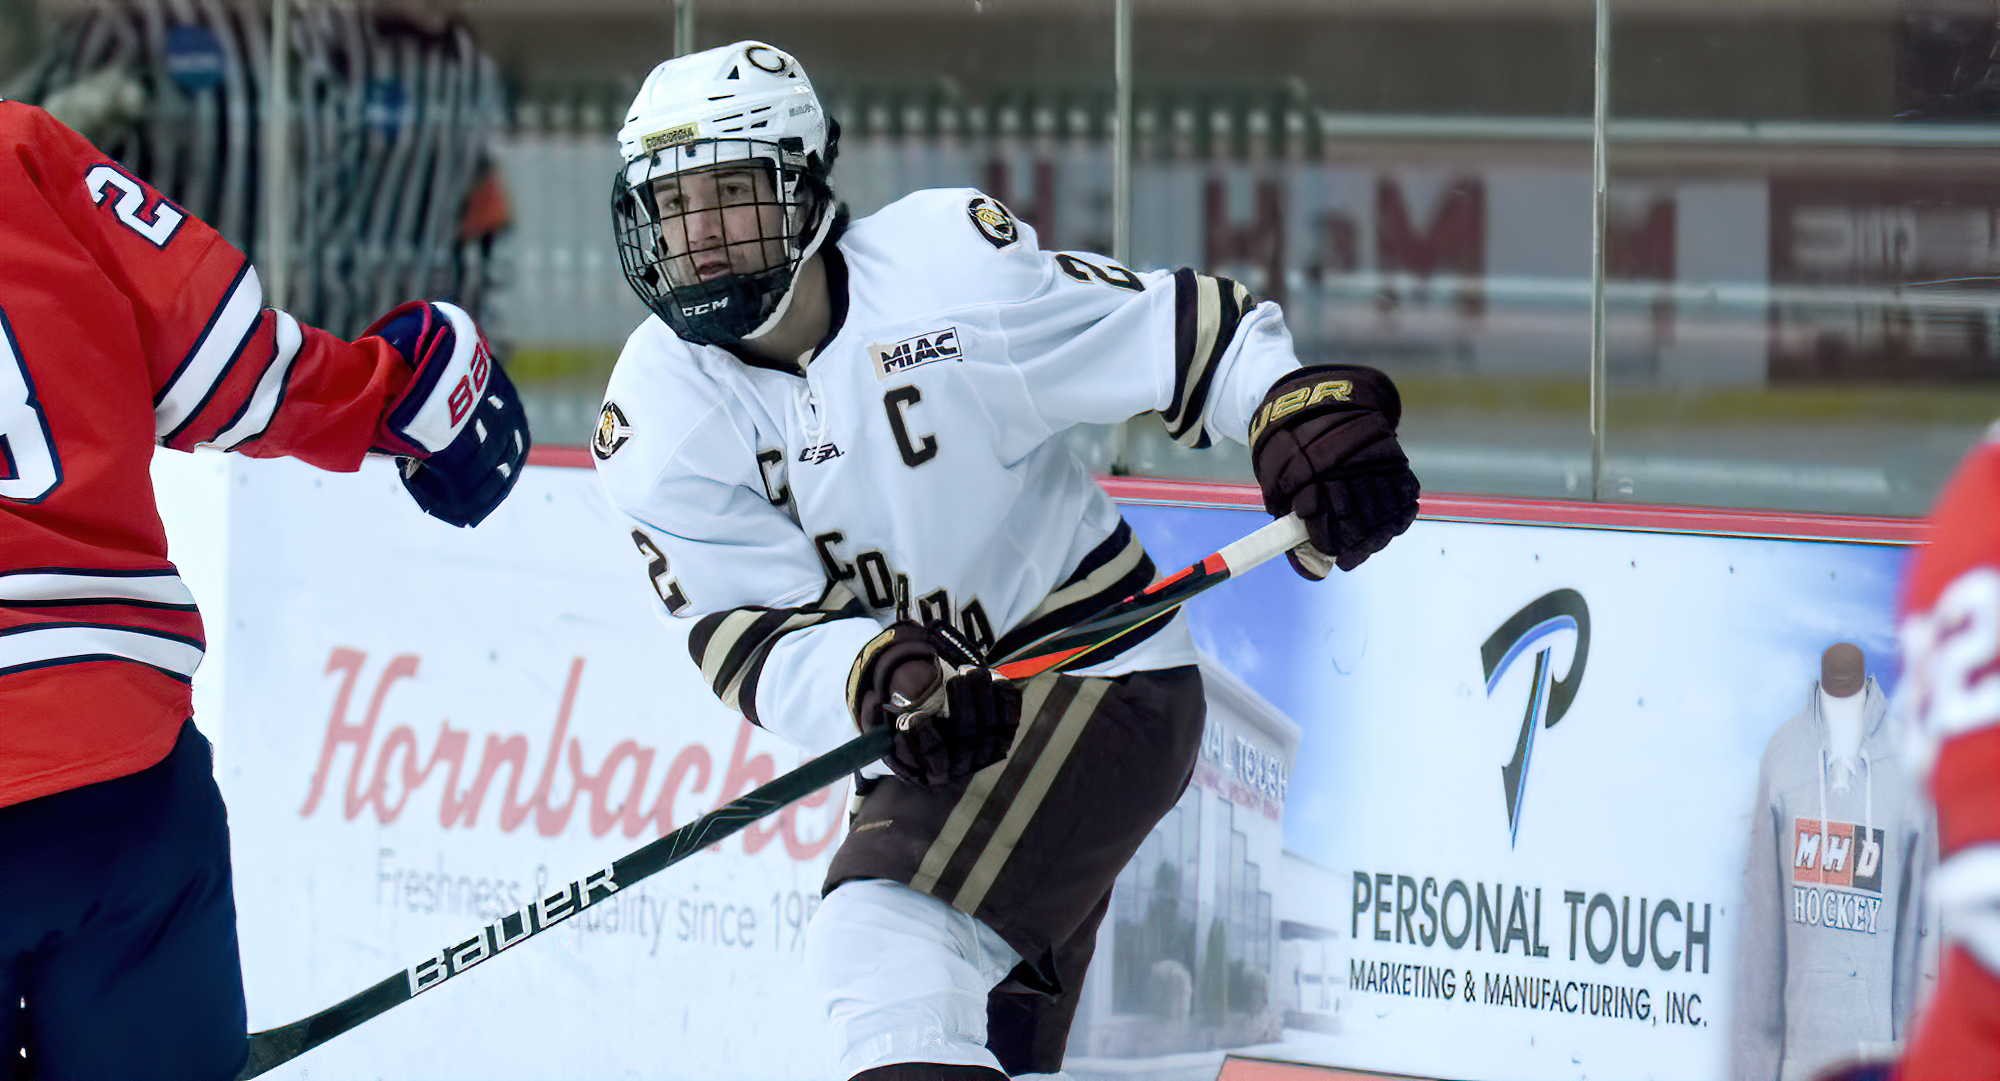 Senior defenseman Alex Stoley scored his third goal in as many games in the Cobbers 2-1 OT loss at St. Olaf.